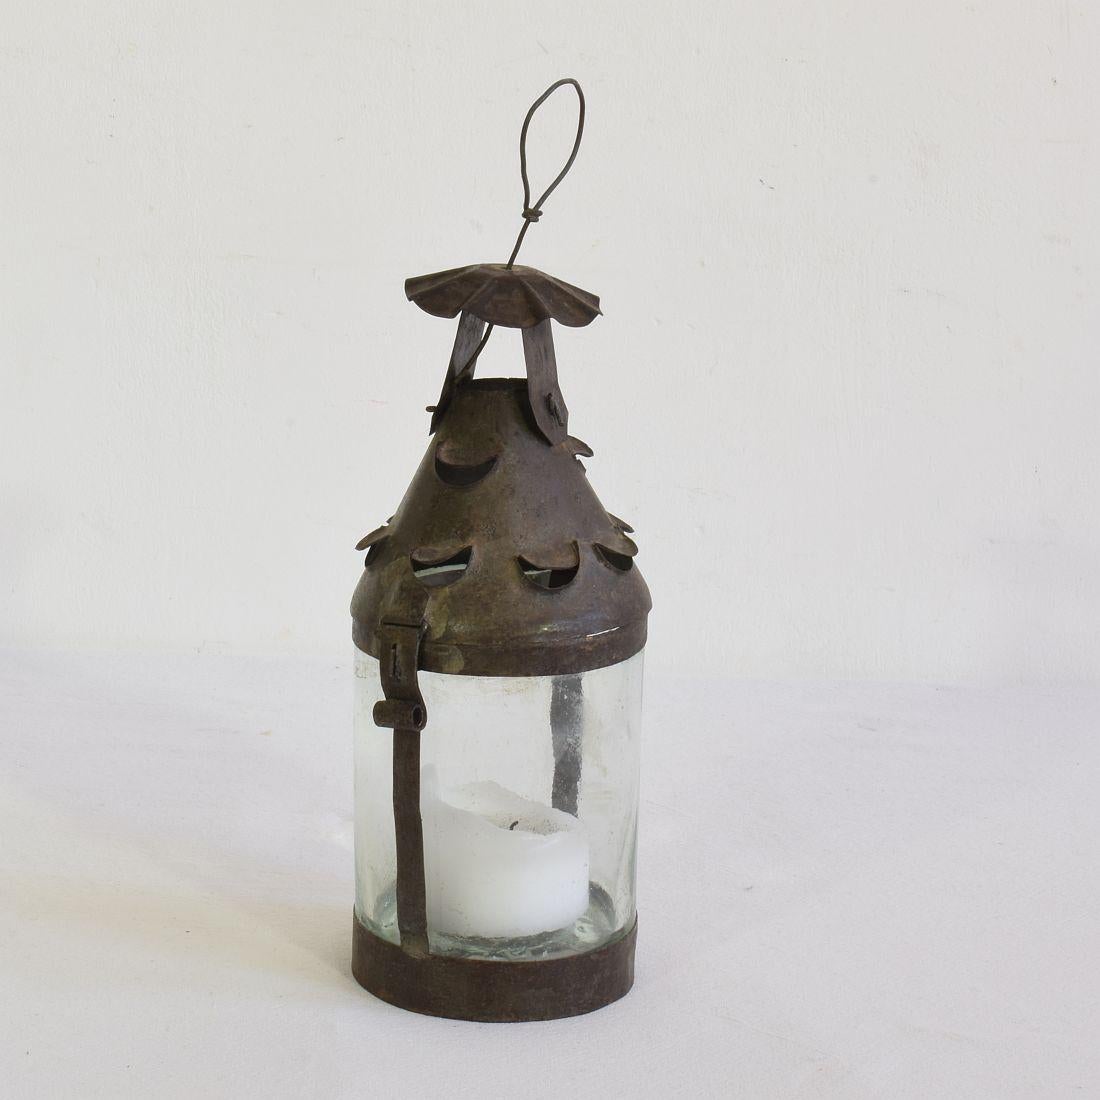 Very rare small folk art lantern, France, circa 1850-1900.
Made from a part of a glass Evian water bottle and iron.
Beautiful weathered.



